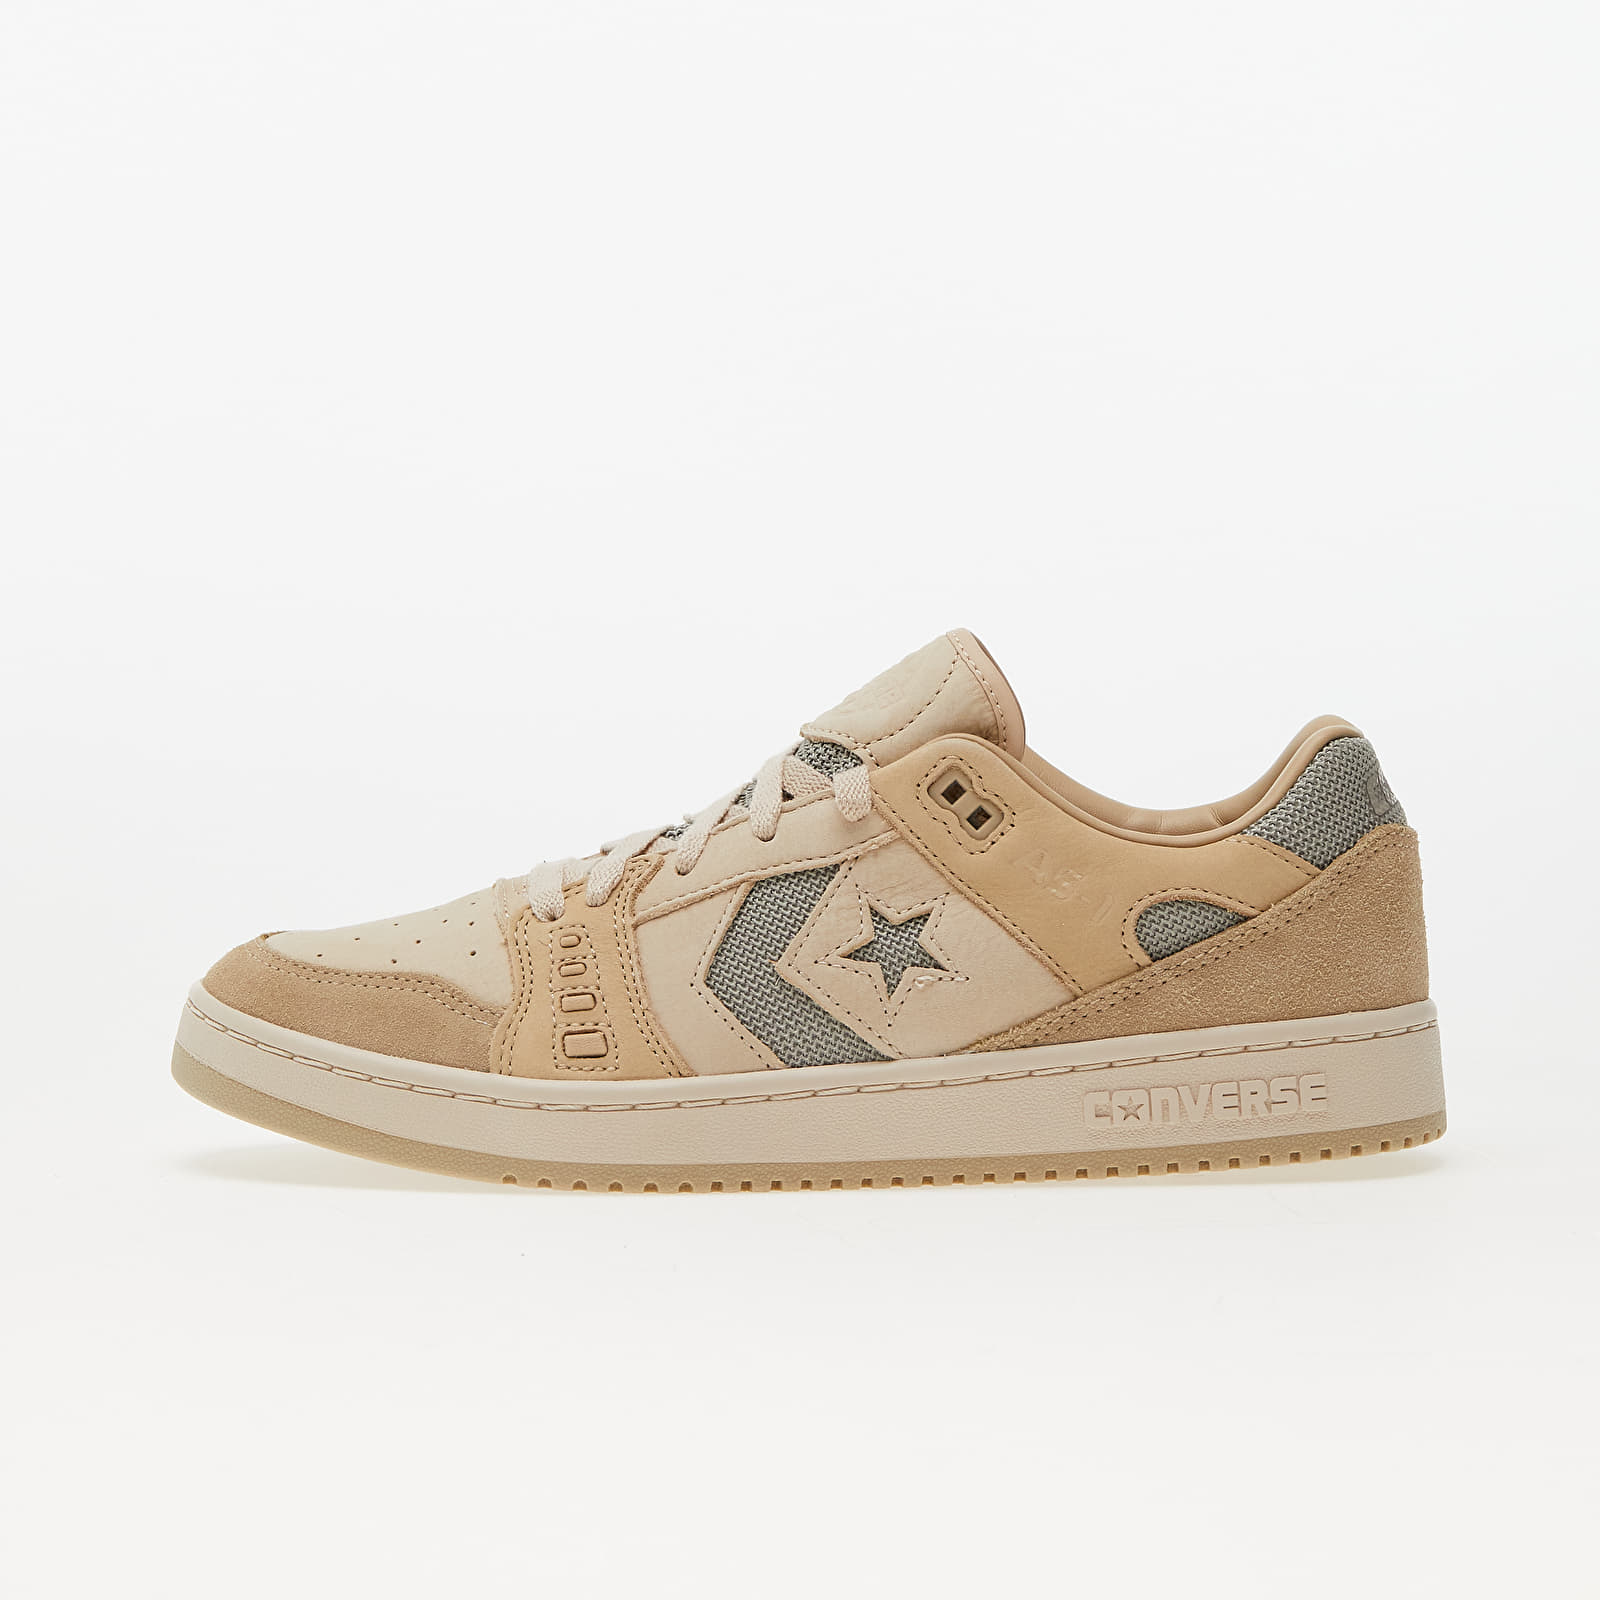 Converse - cons as-1 pro shifting sand/ warm sand